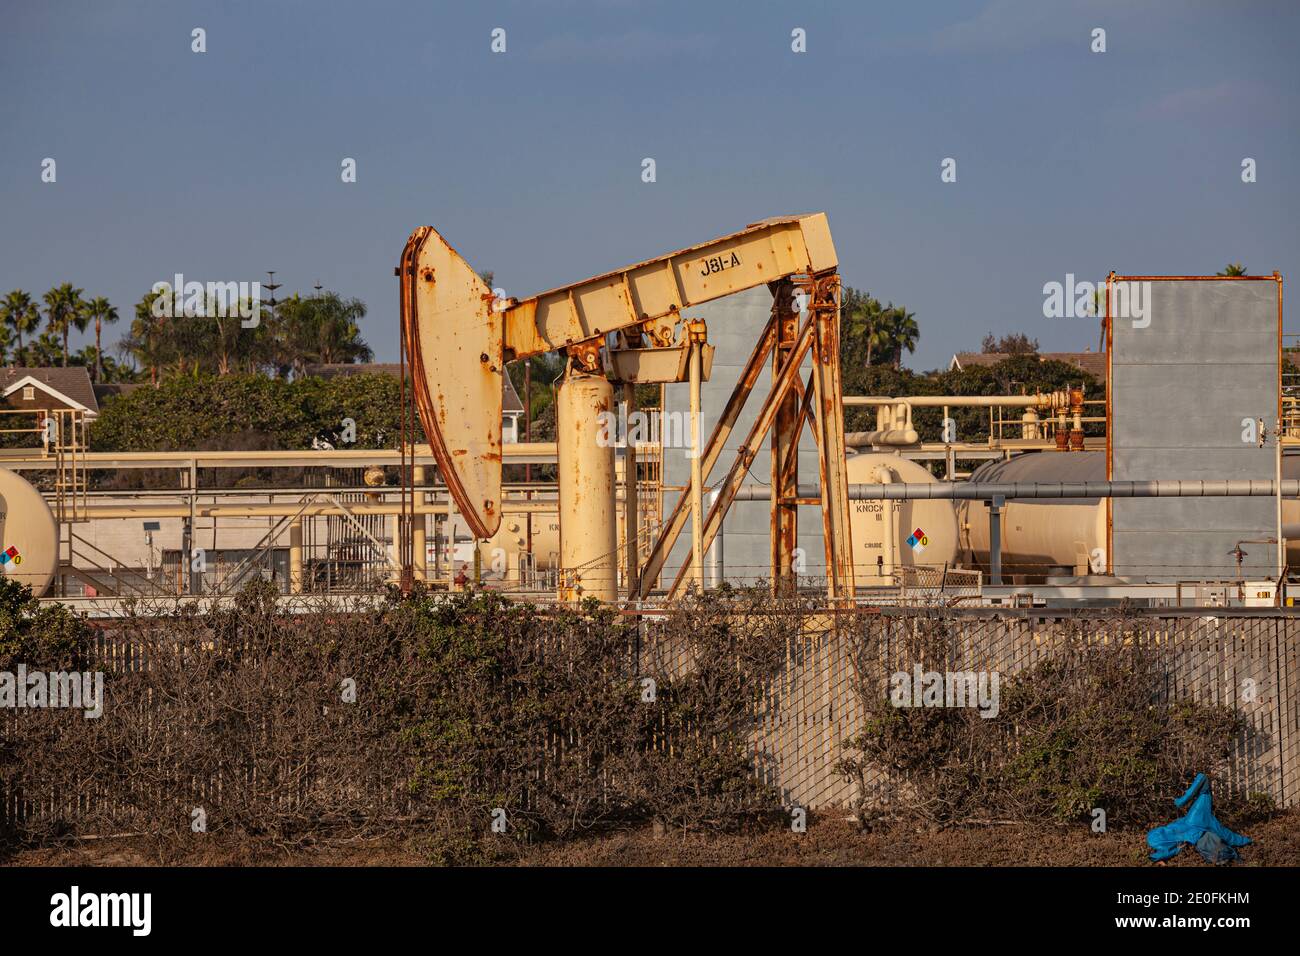 Old oil wells and pumpjacks at CRC (California Resources Corporation) facility in Huntington Beach. CRC has filed for bankruptcy and there are questio Stock Photo